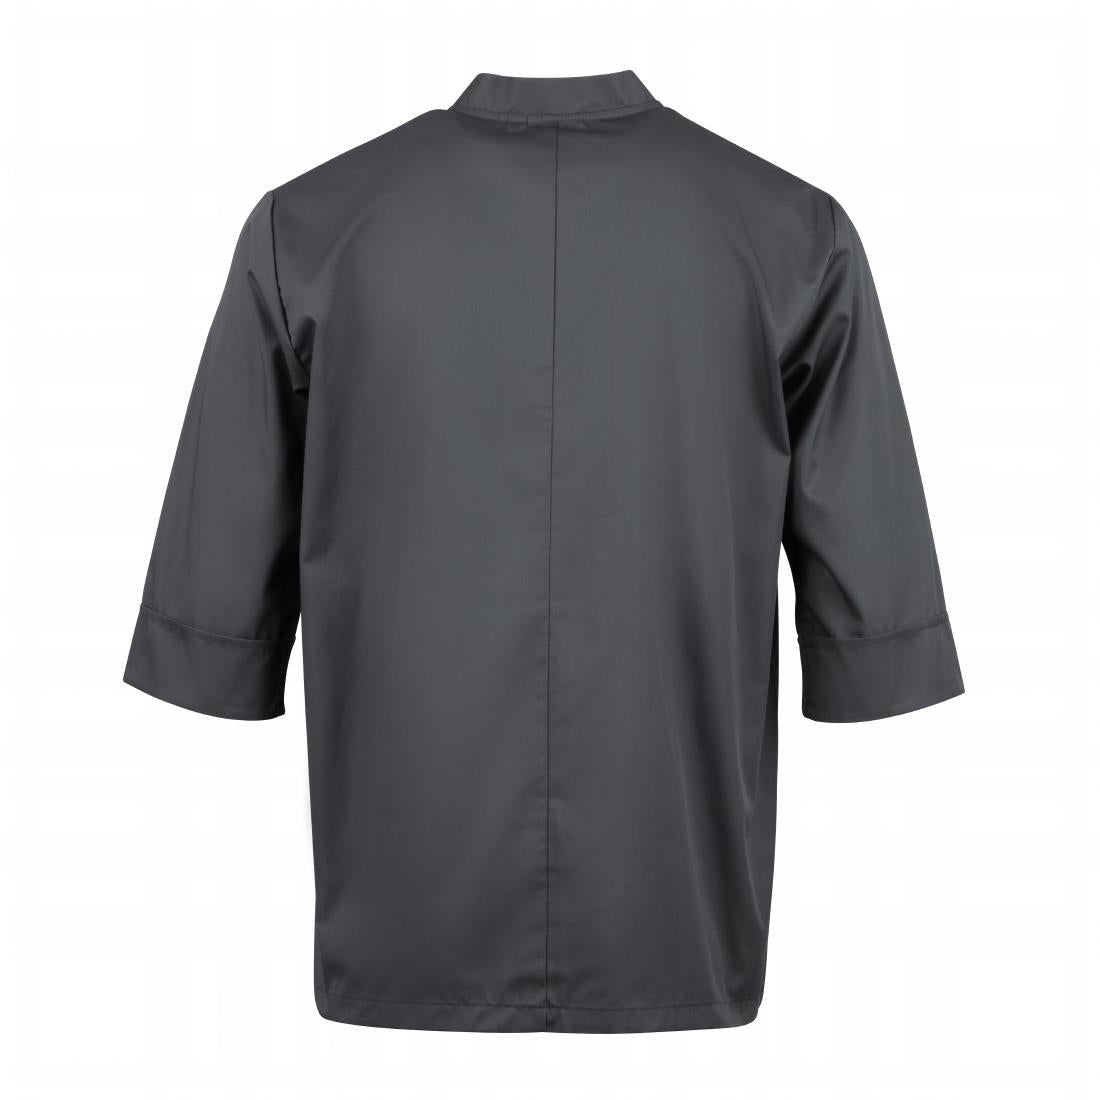 A934-L Chef Works Unisex Chefs Jacket Grey L JD Catering Equipment Solutions Ltd